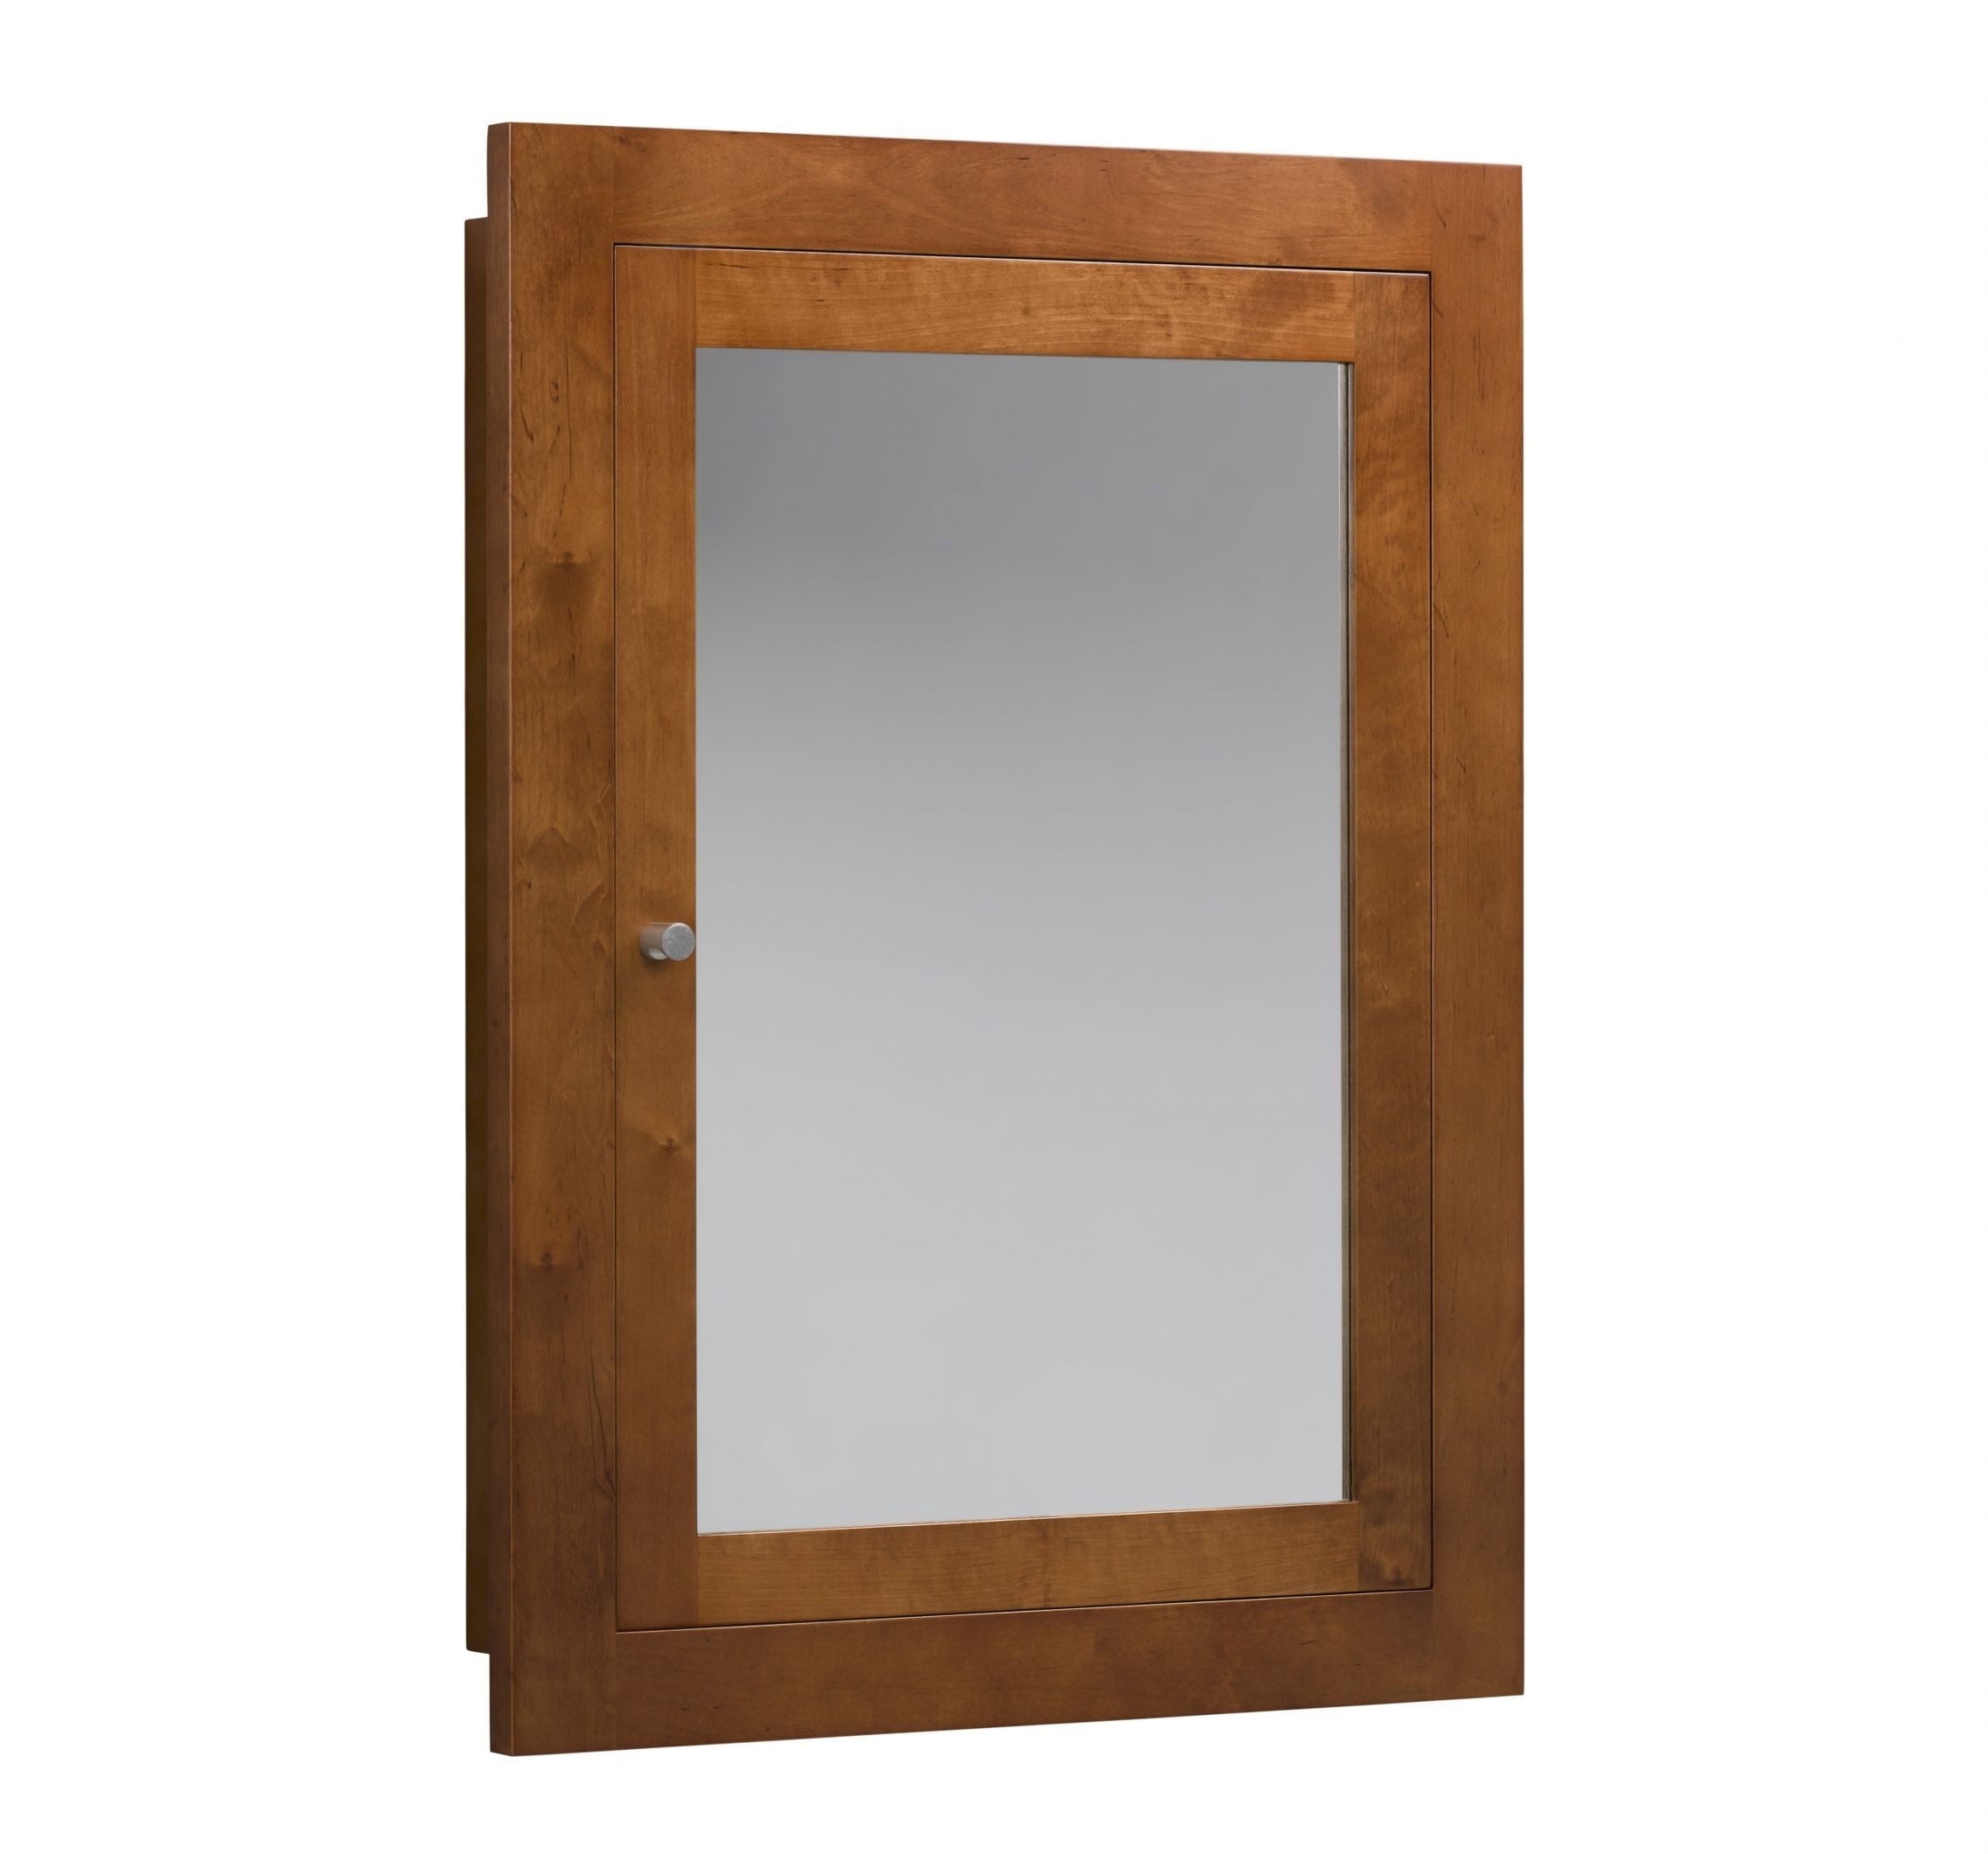 618125 wood medicine cabinet features both side mirrors 2 mirrors